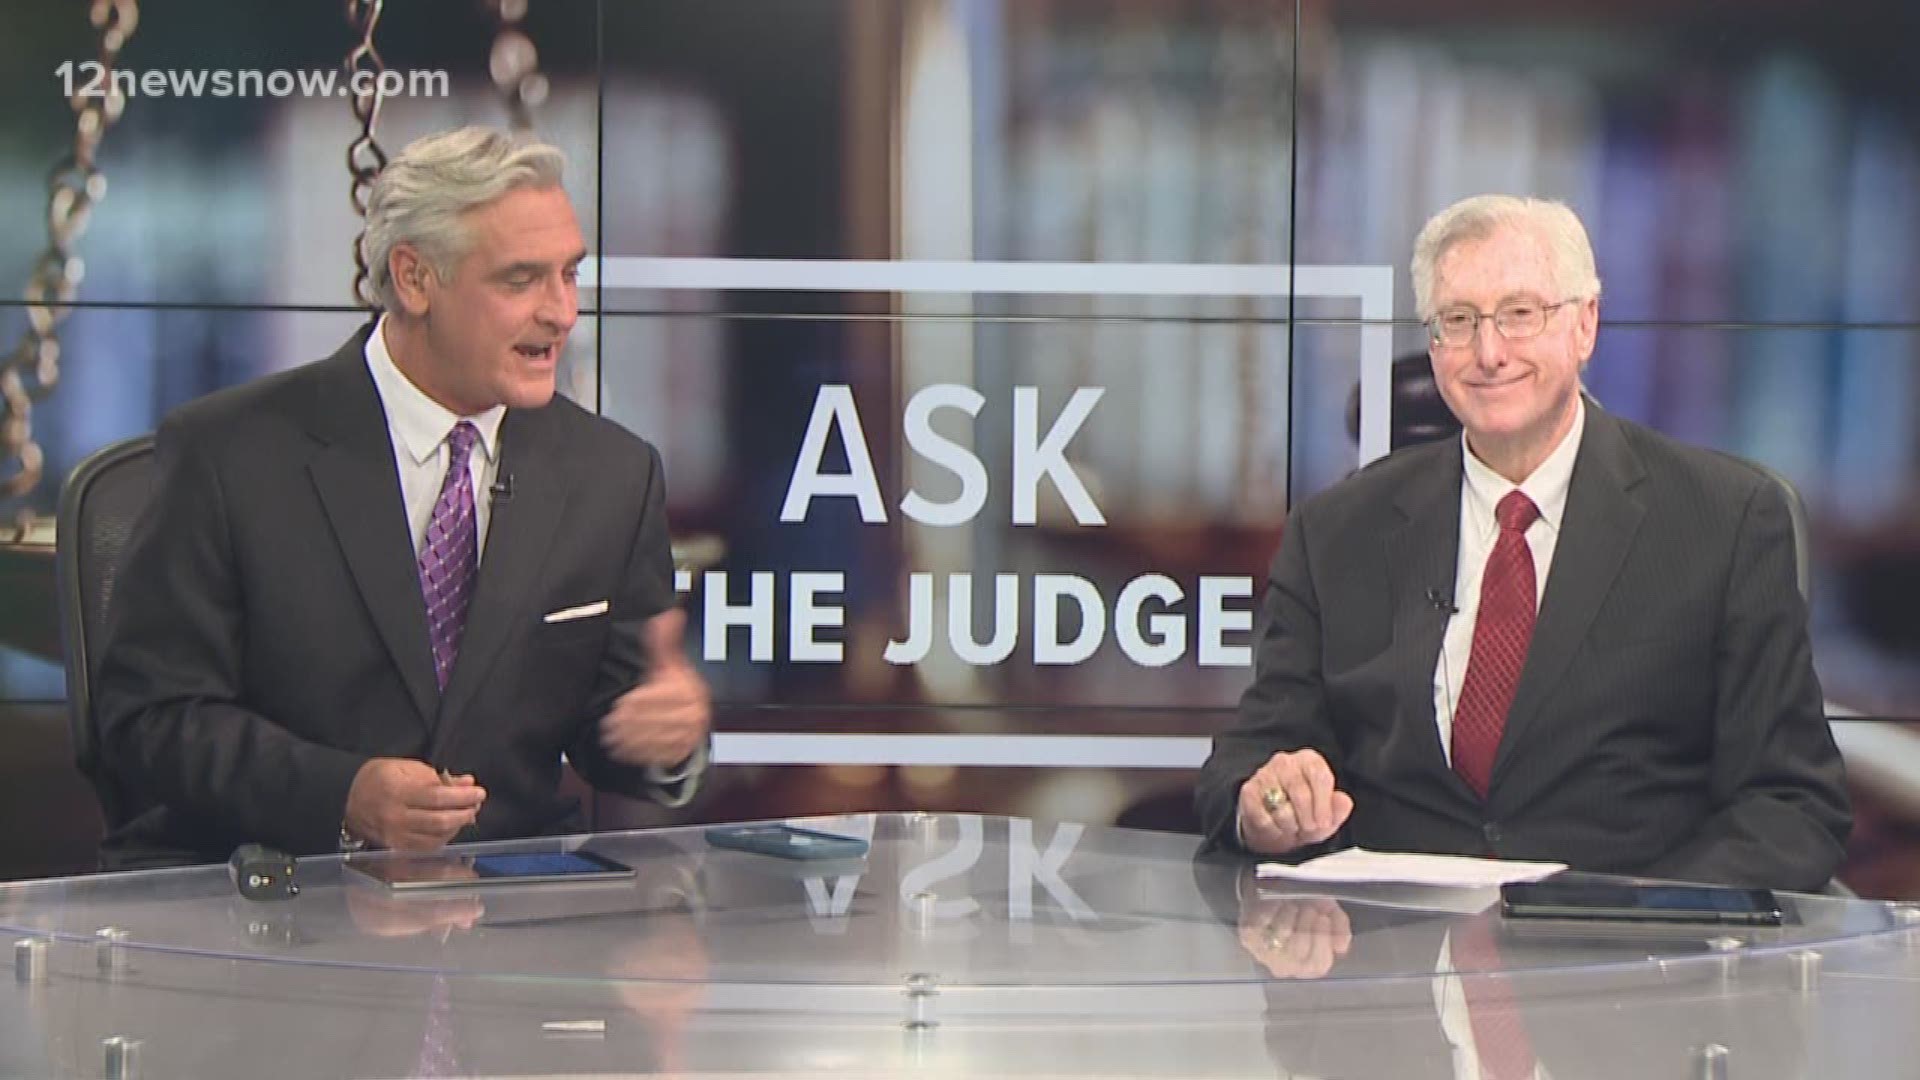 Judge Larry Thorne answers viewer questions about bouncing checks, pay cuts, and neighbor issues